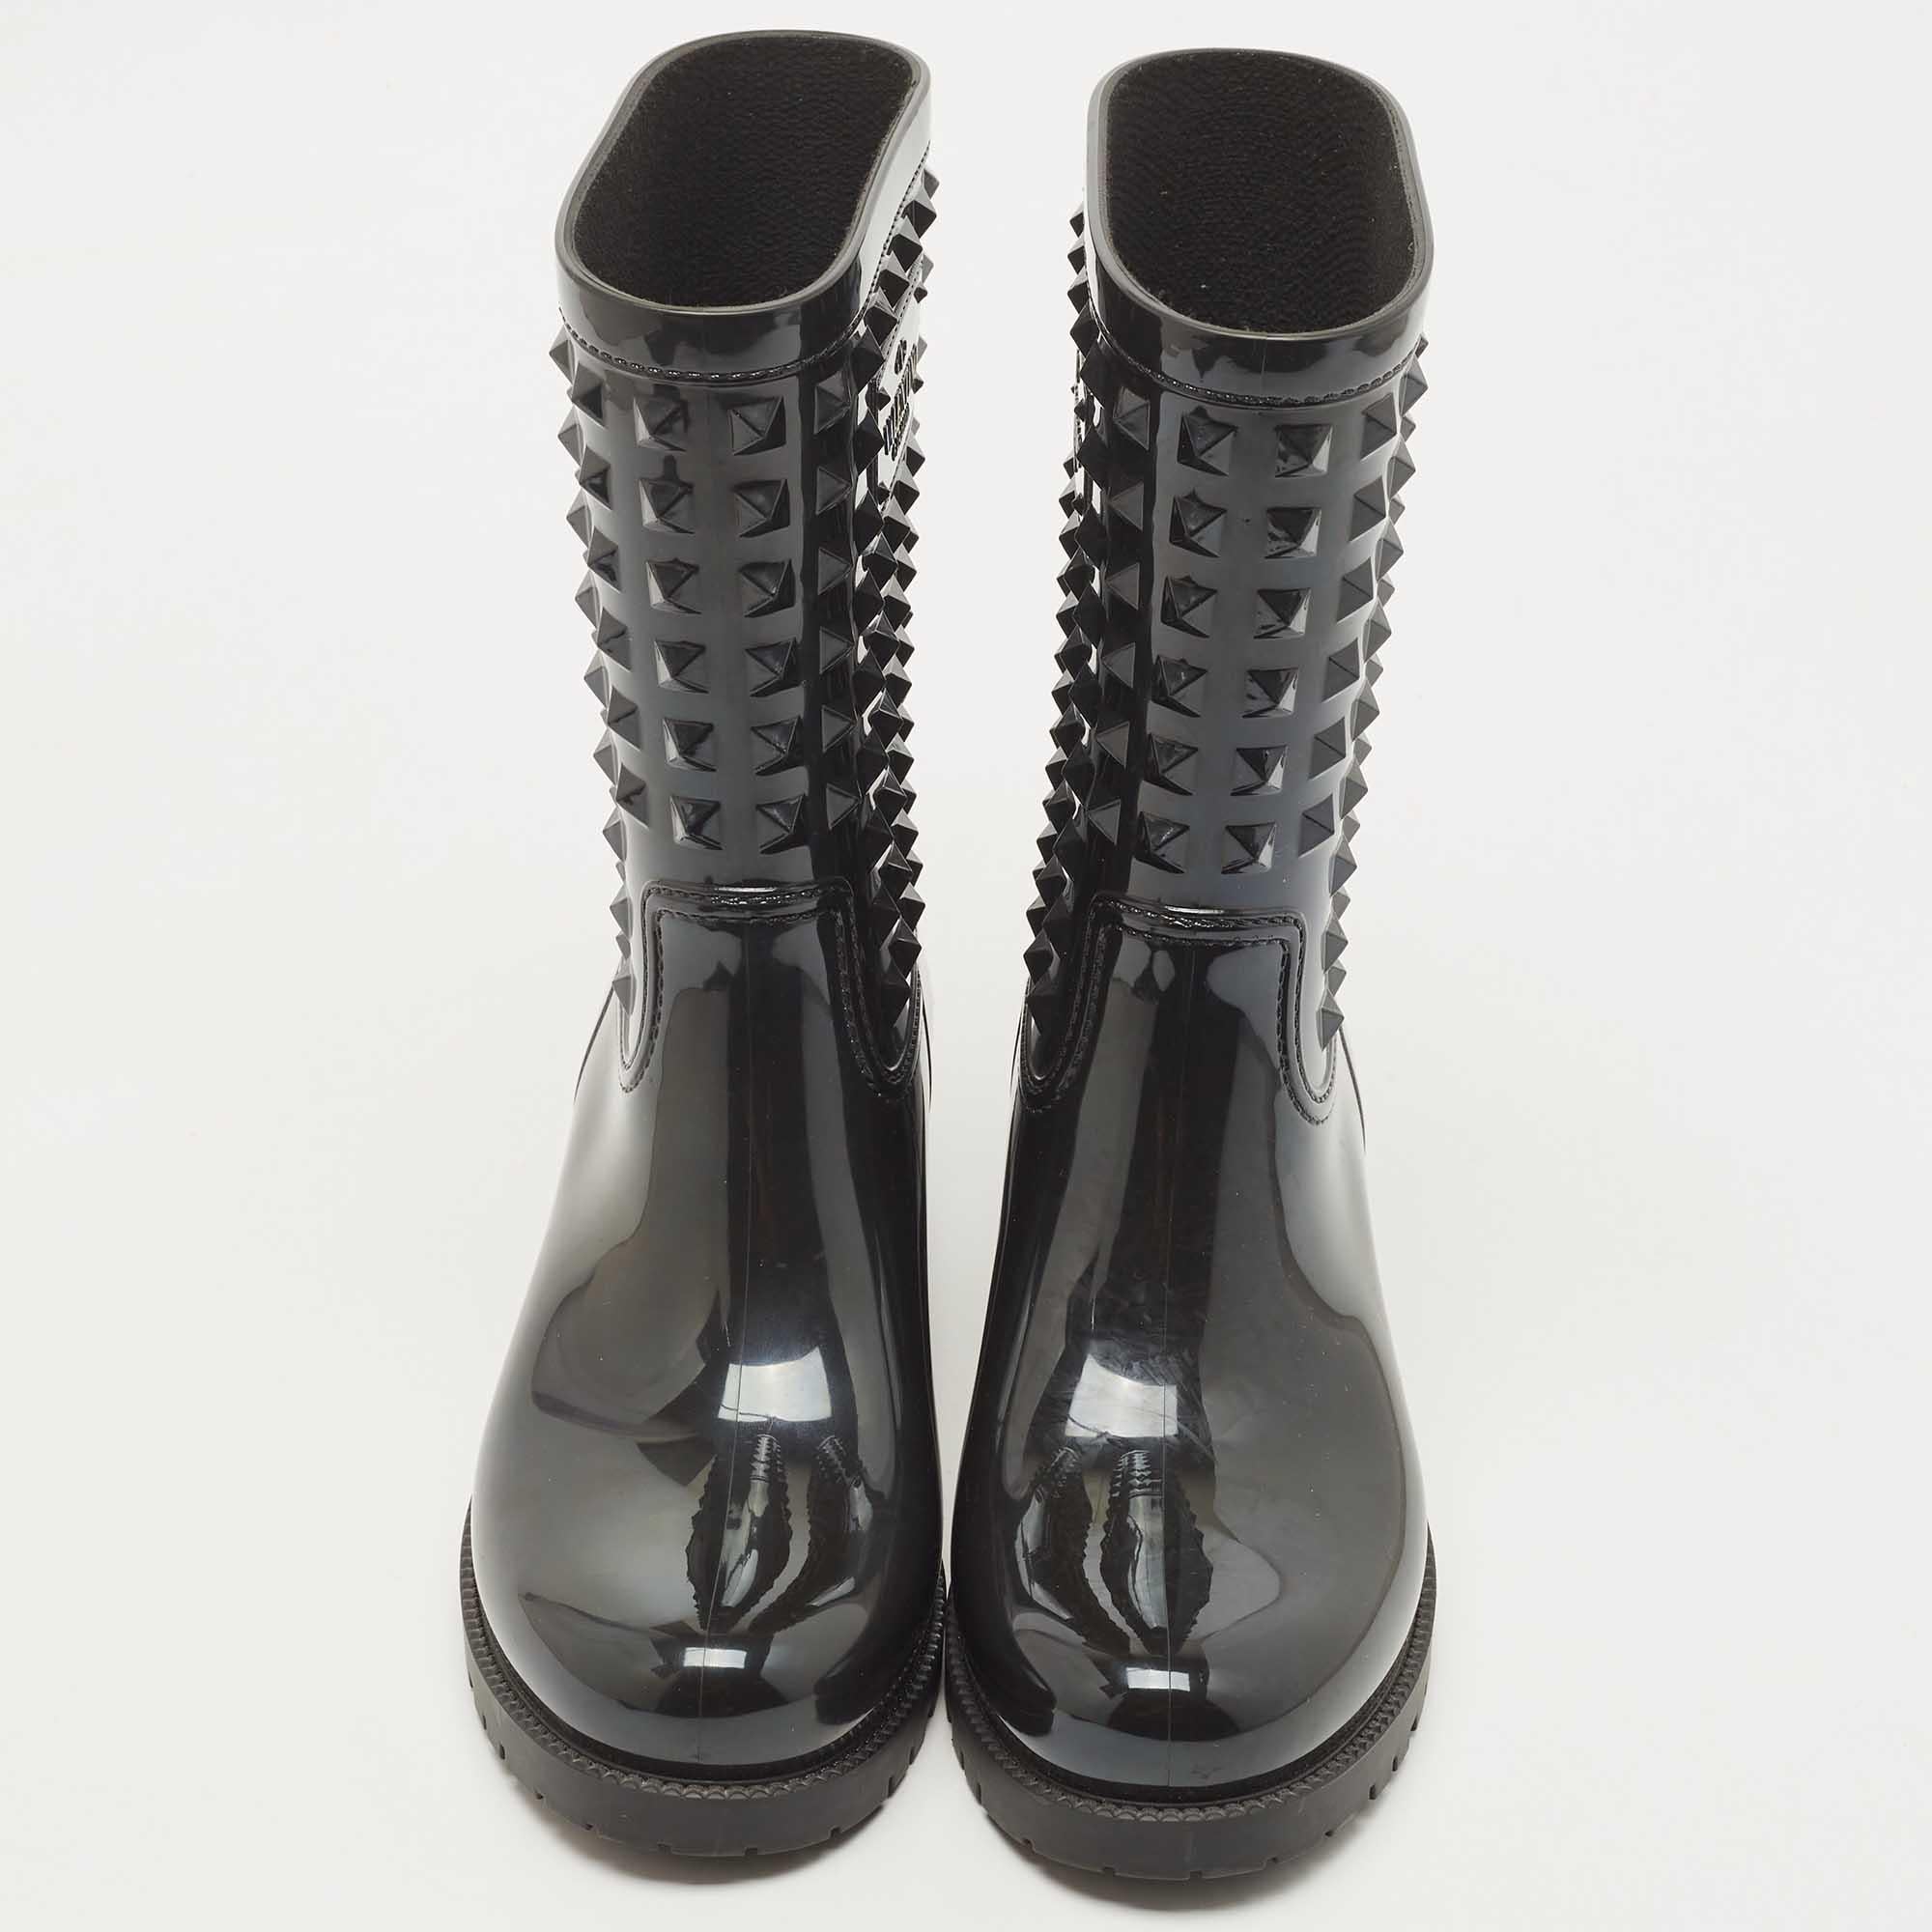 Enjoy rainy days in style with these Louis Vuitton boots. Modern in design and craftsmanship, they are fashioned to keep you comfortable and chic!

Includes: Original Dustbag, Original Box, Info Booklet

